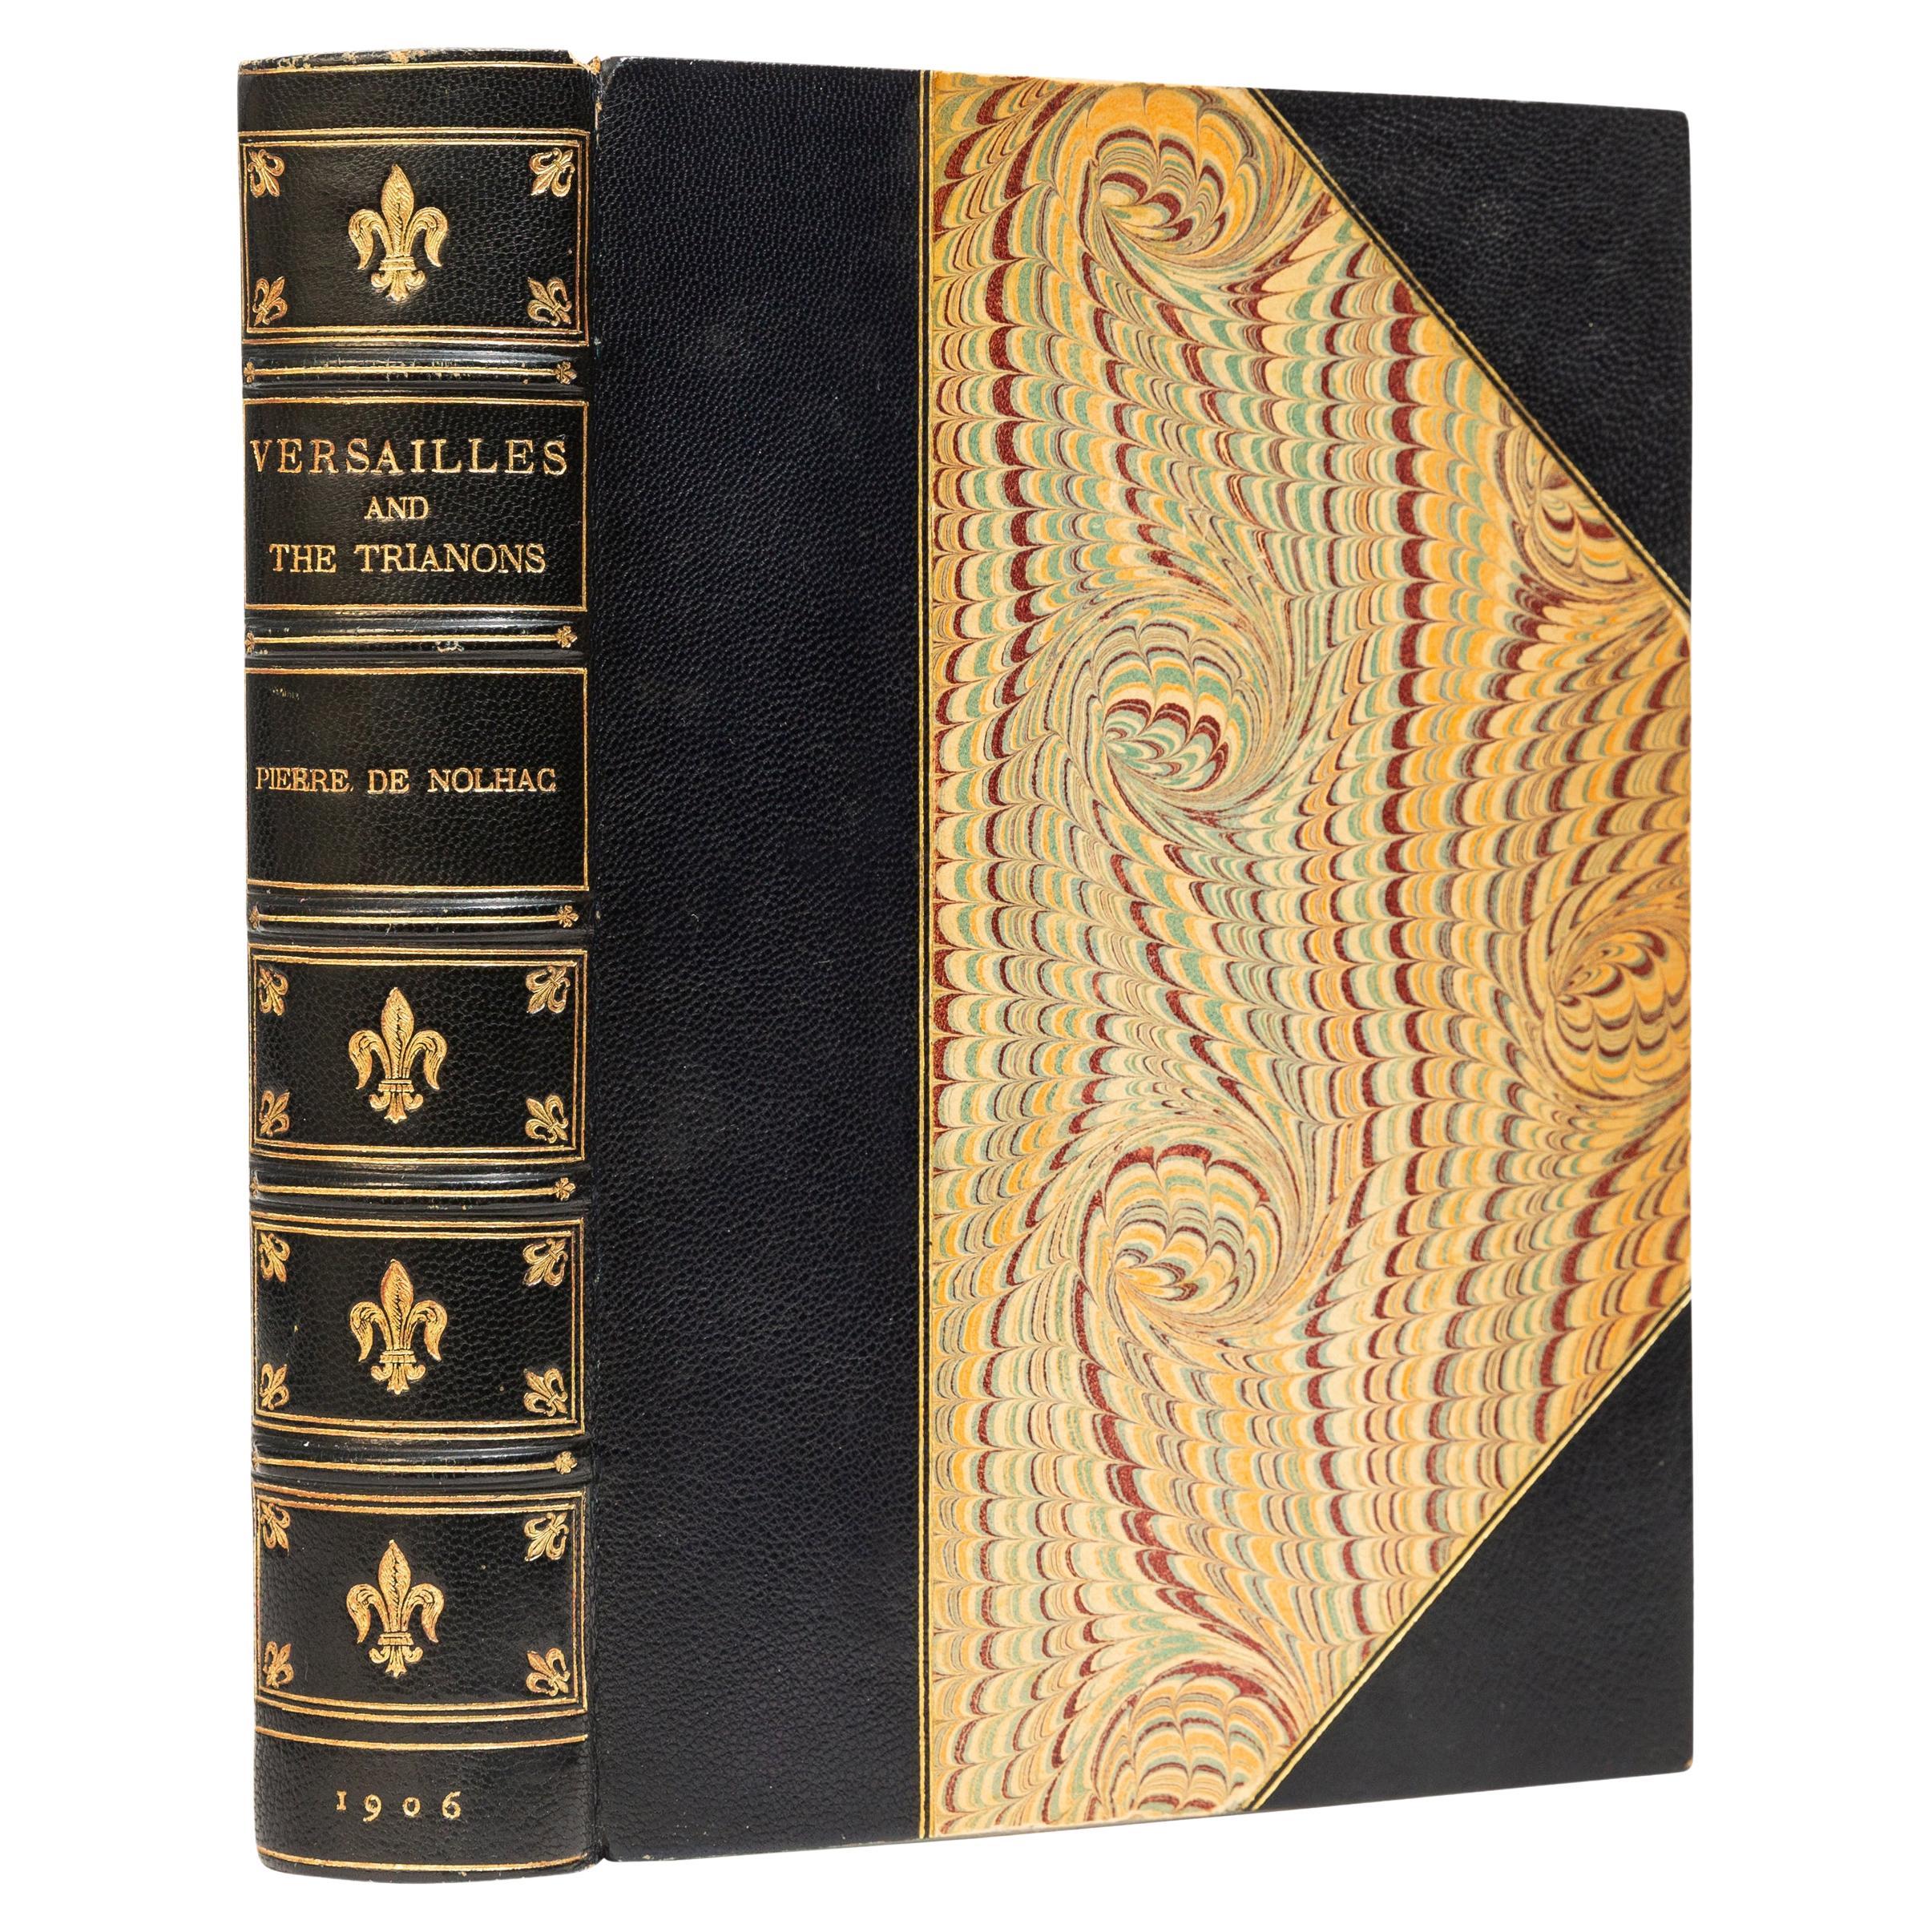 1 Volume, Pierre DeNolhac, Versailles and The Trianons